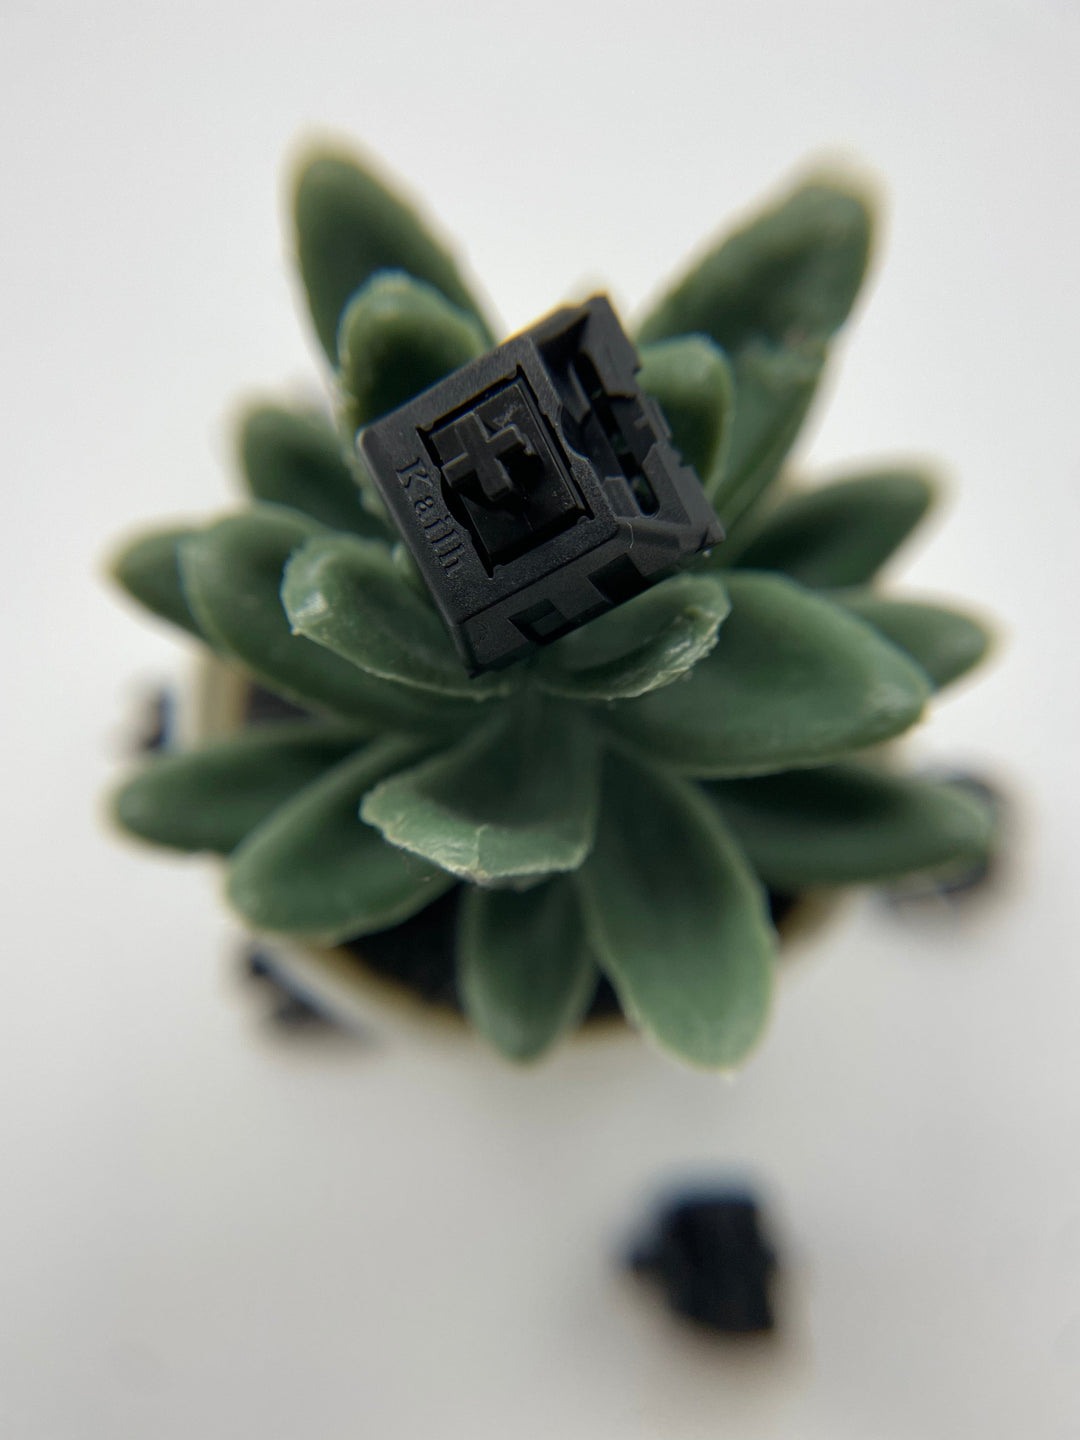 KNC Keys! Linear Switch Kailh Black Linear Switches